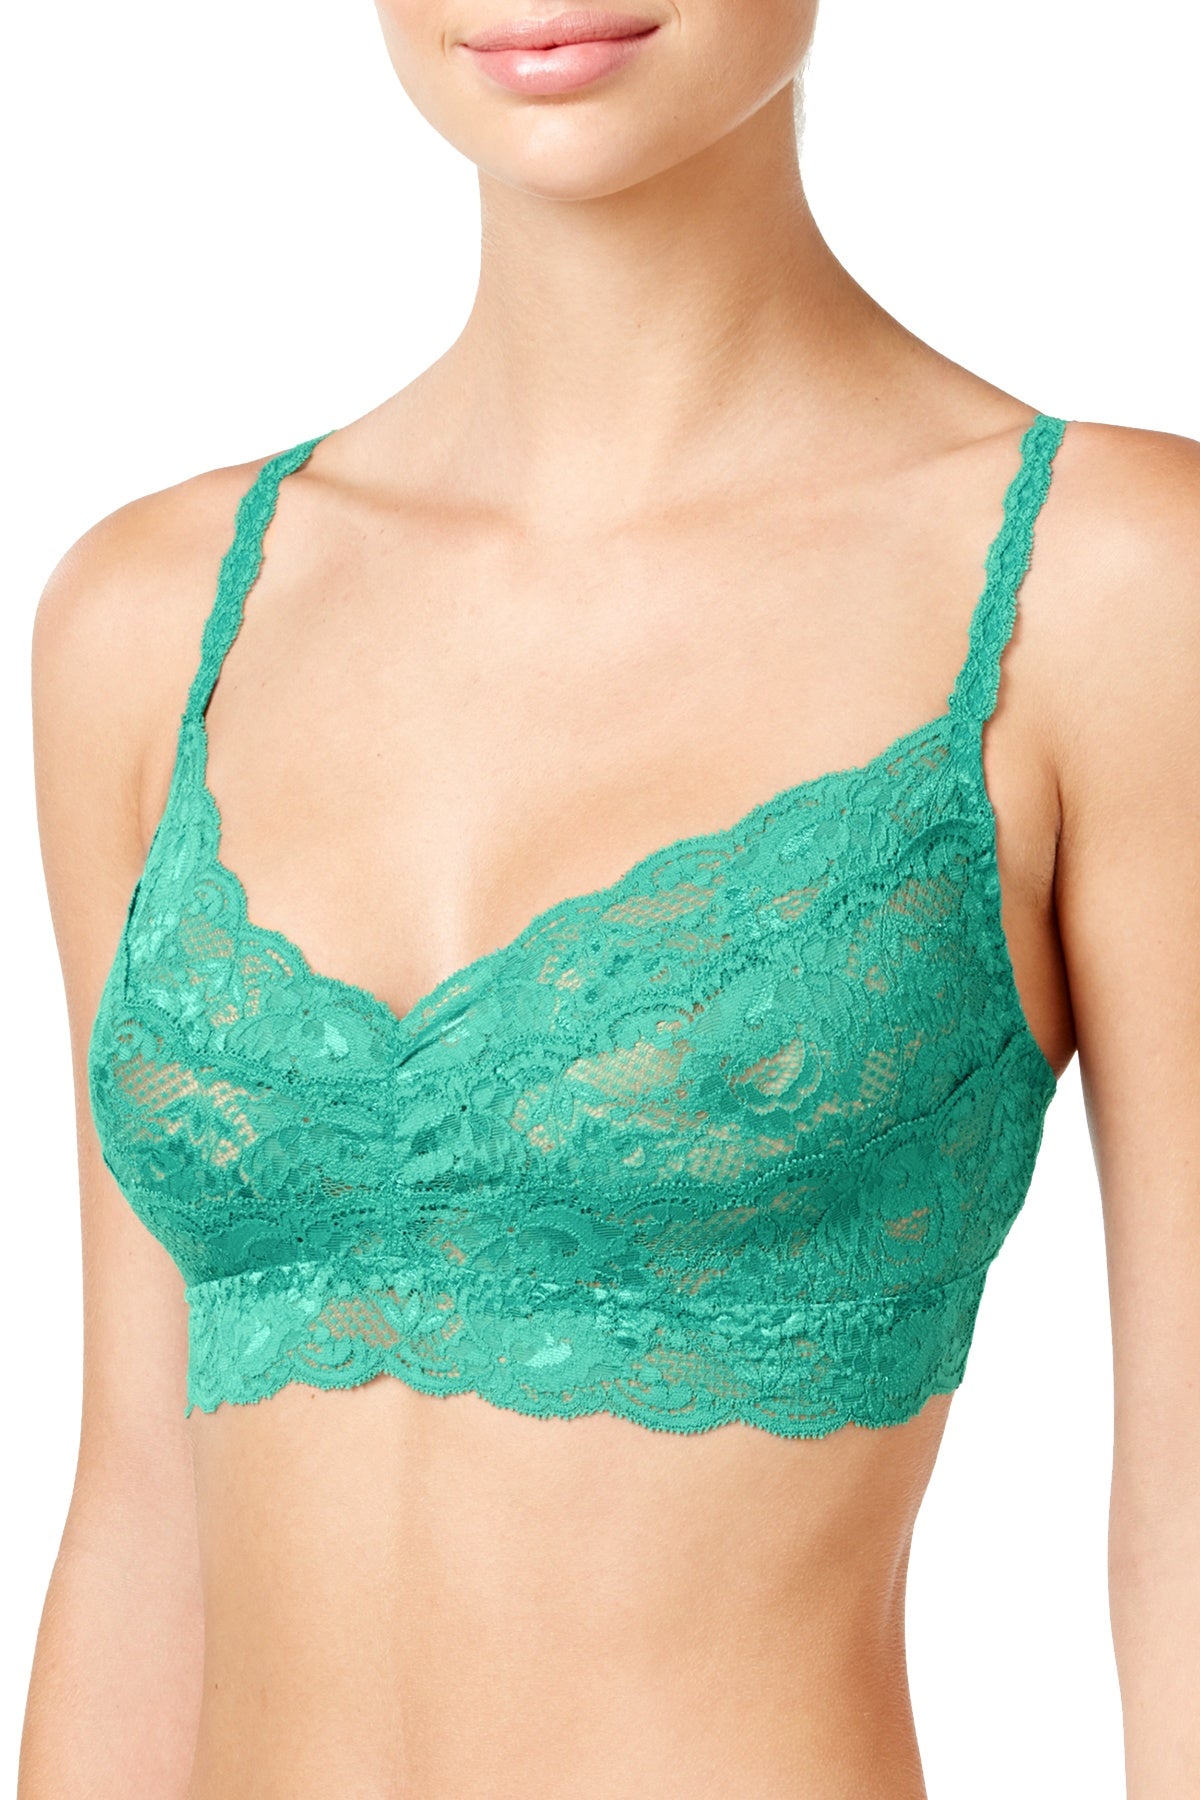 Cosabella Mint Never Say Never Sweetie Bralette